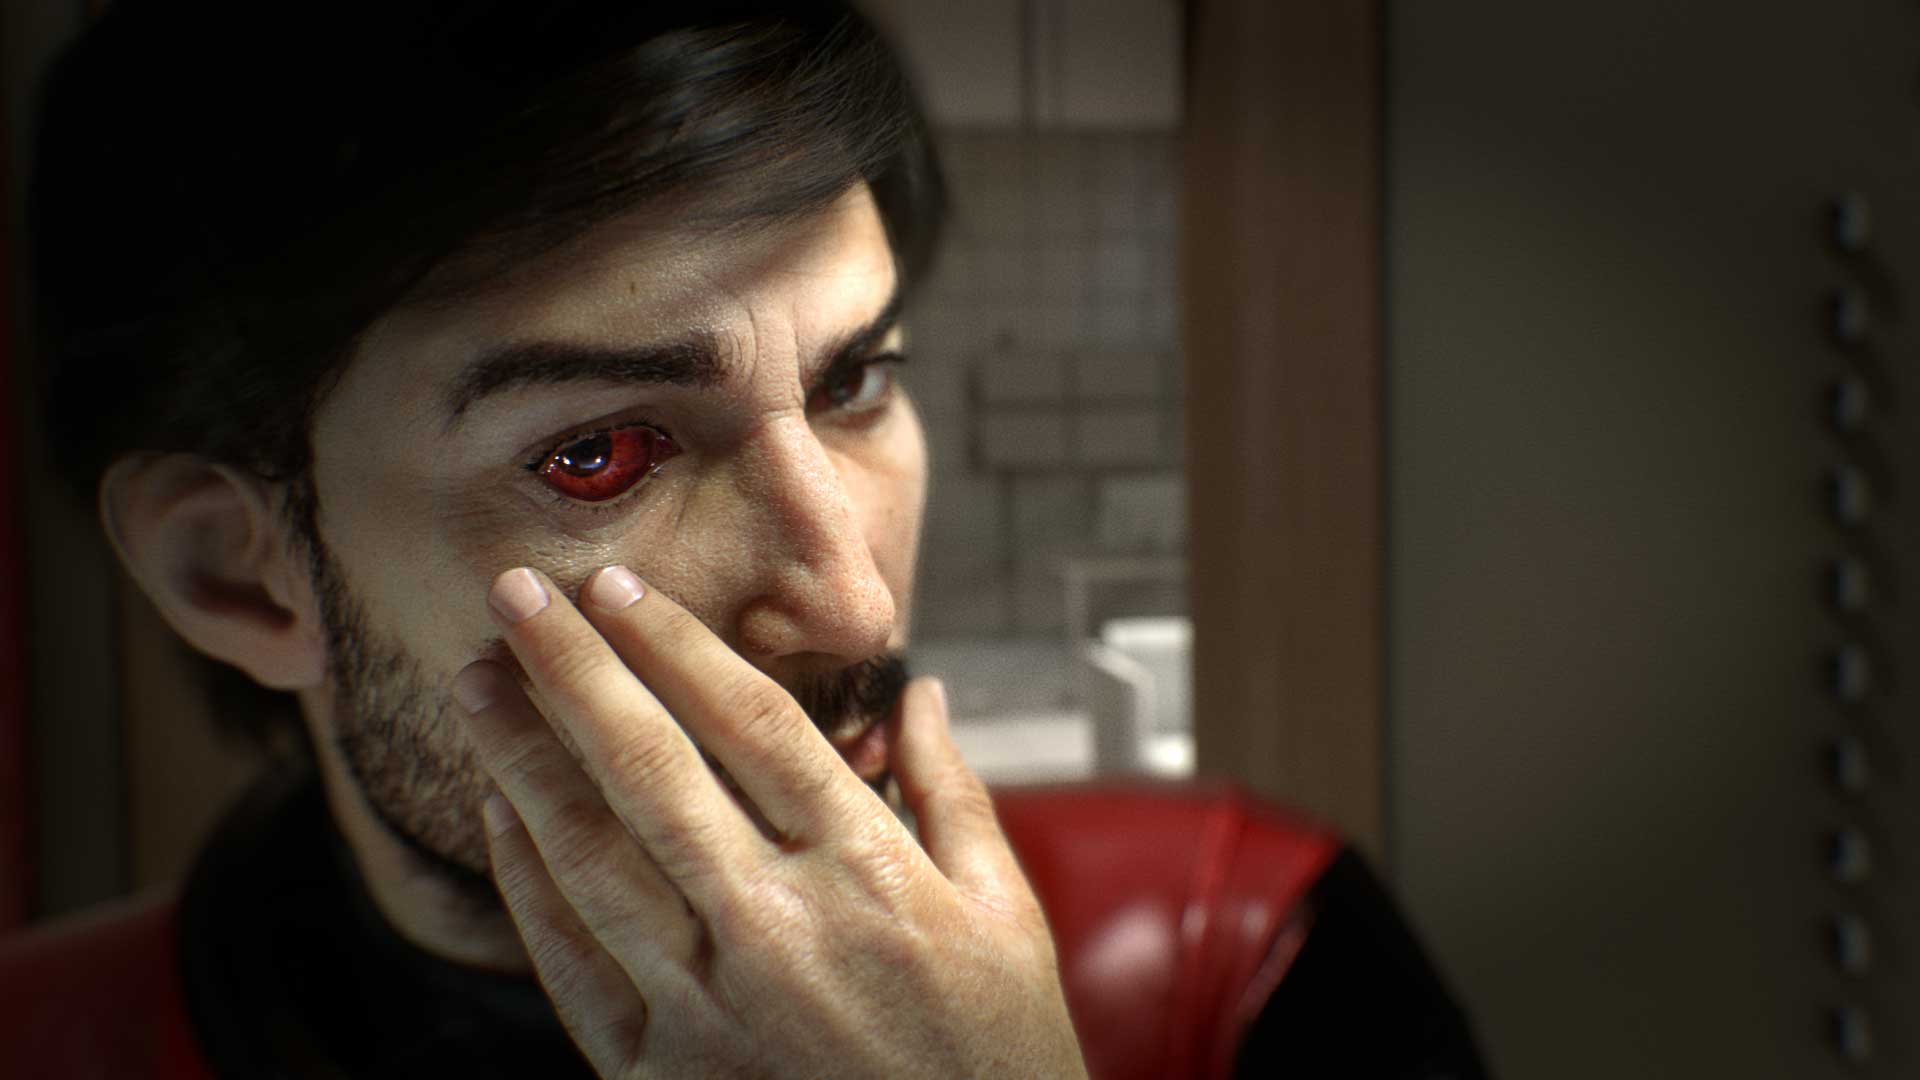 Image for Prey PS4 Pro support is nice but the patch also added eye-bleeding stutter